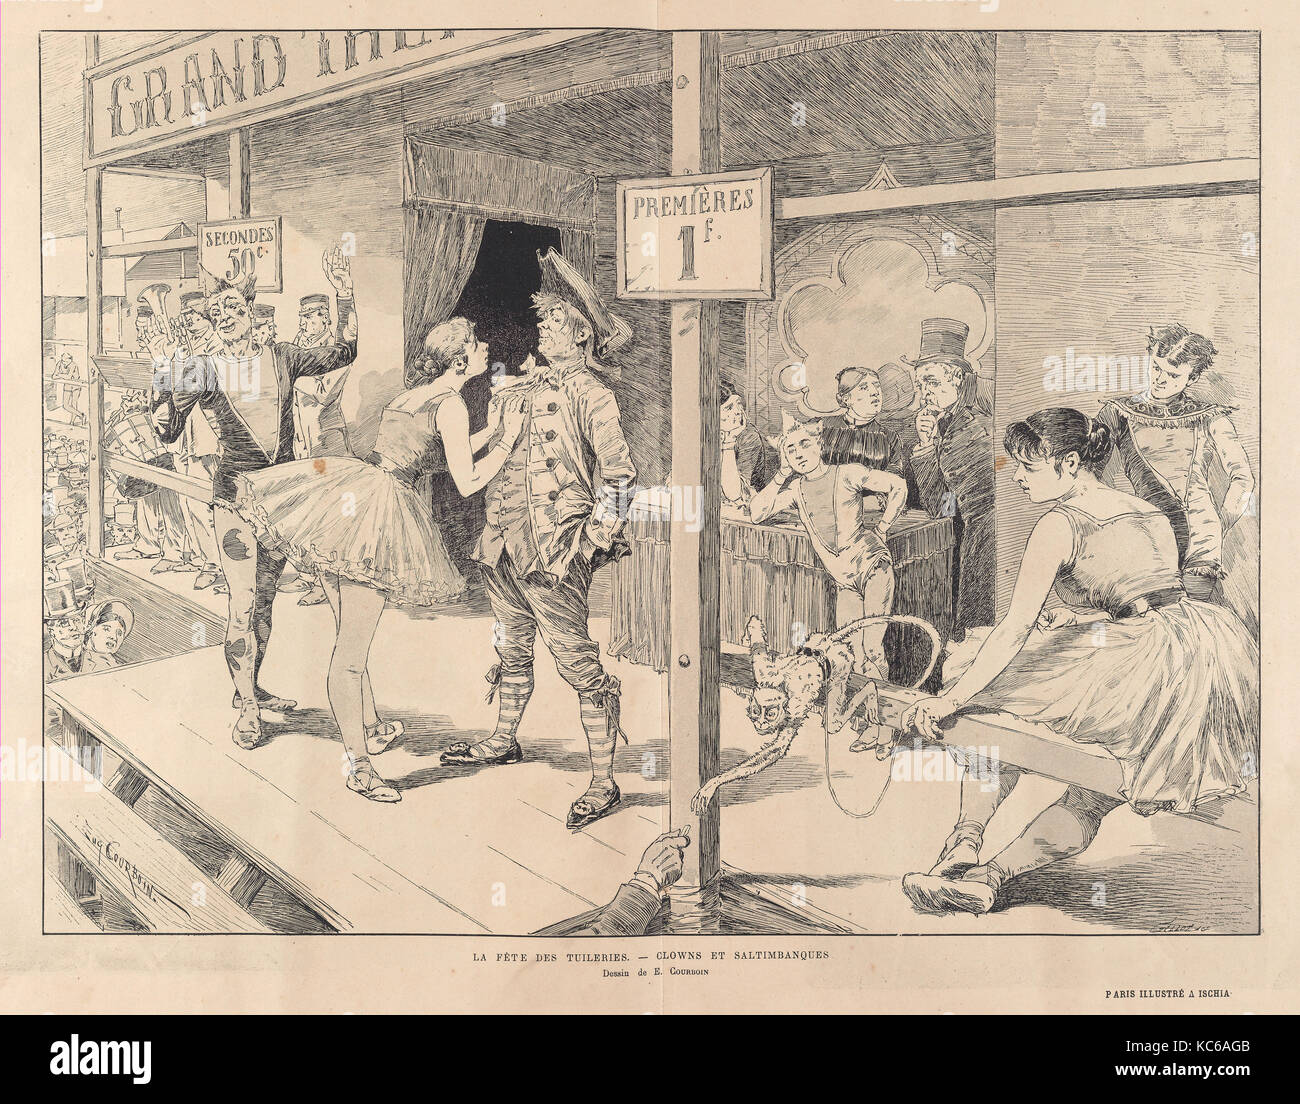 From Le Monde Illustre 28th February 1863. Fancy dress costumes worn by the Empress  Eugenie and others to parties in Paris in 1863 Stock Photo - Alamy